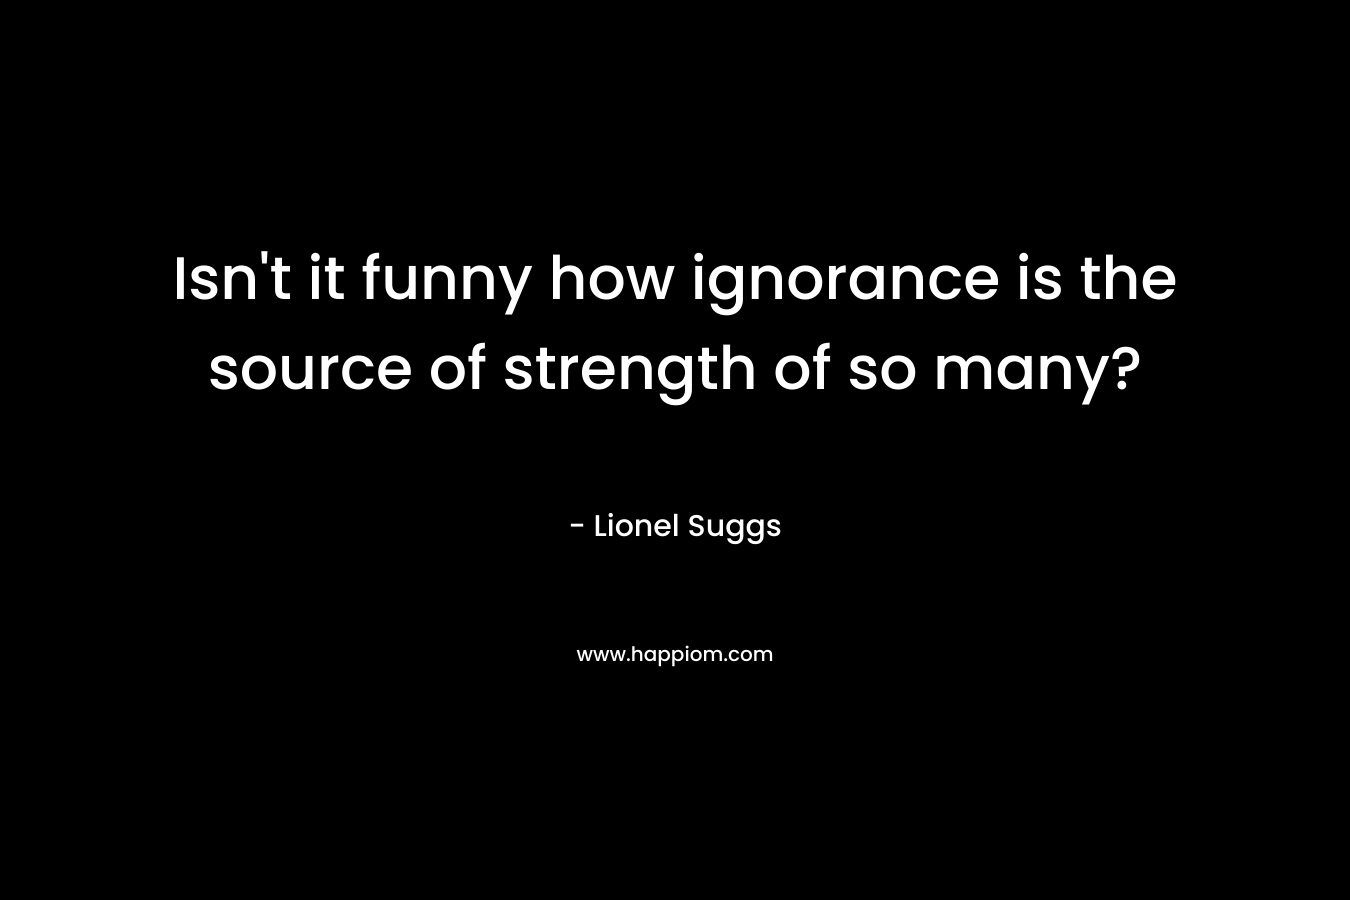 Isn't it funny how ignorance is the source of strength of so many?